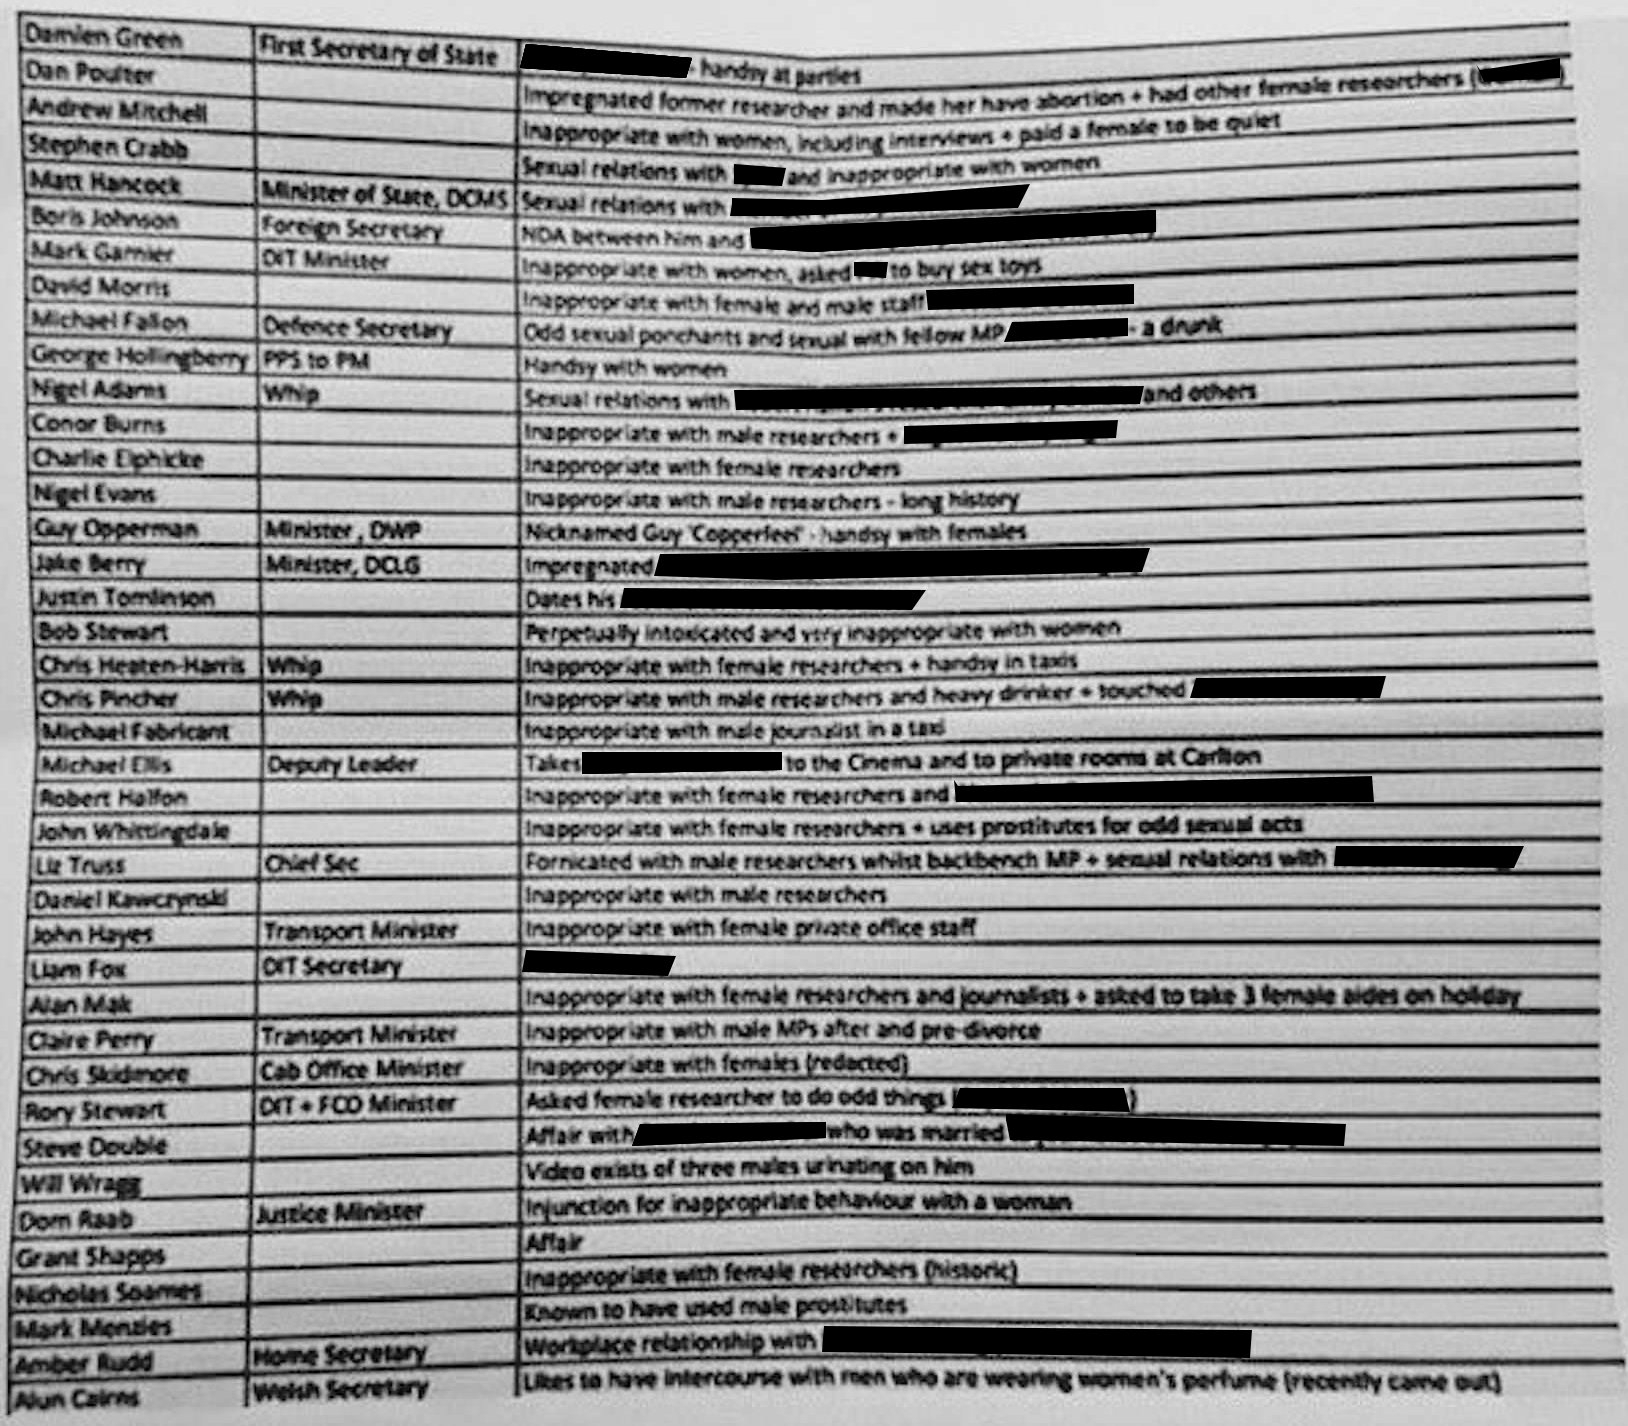 Westminster Spreadsheet With The Unredacted Spreadsheet Of 40 Tory Mps Accused Of Inappropriate